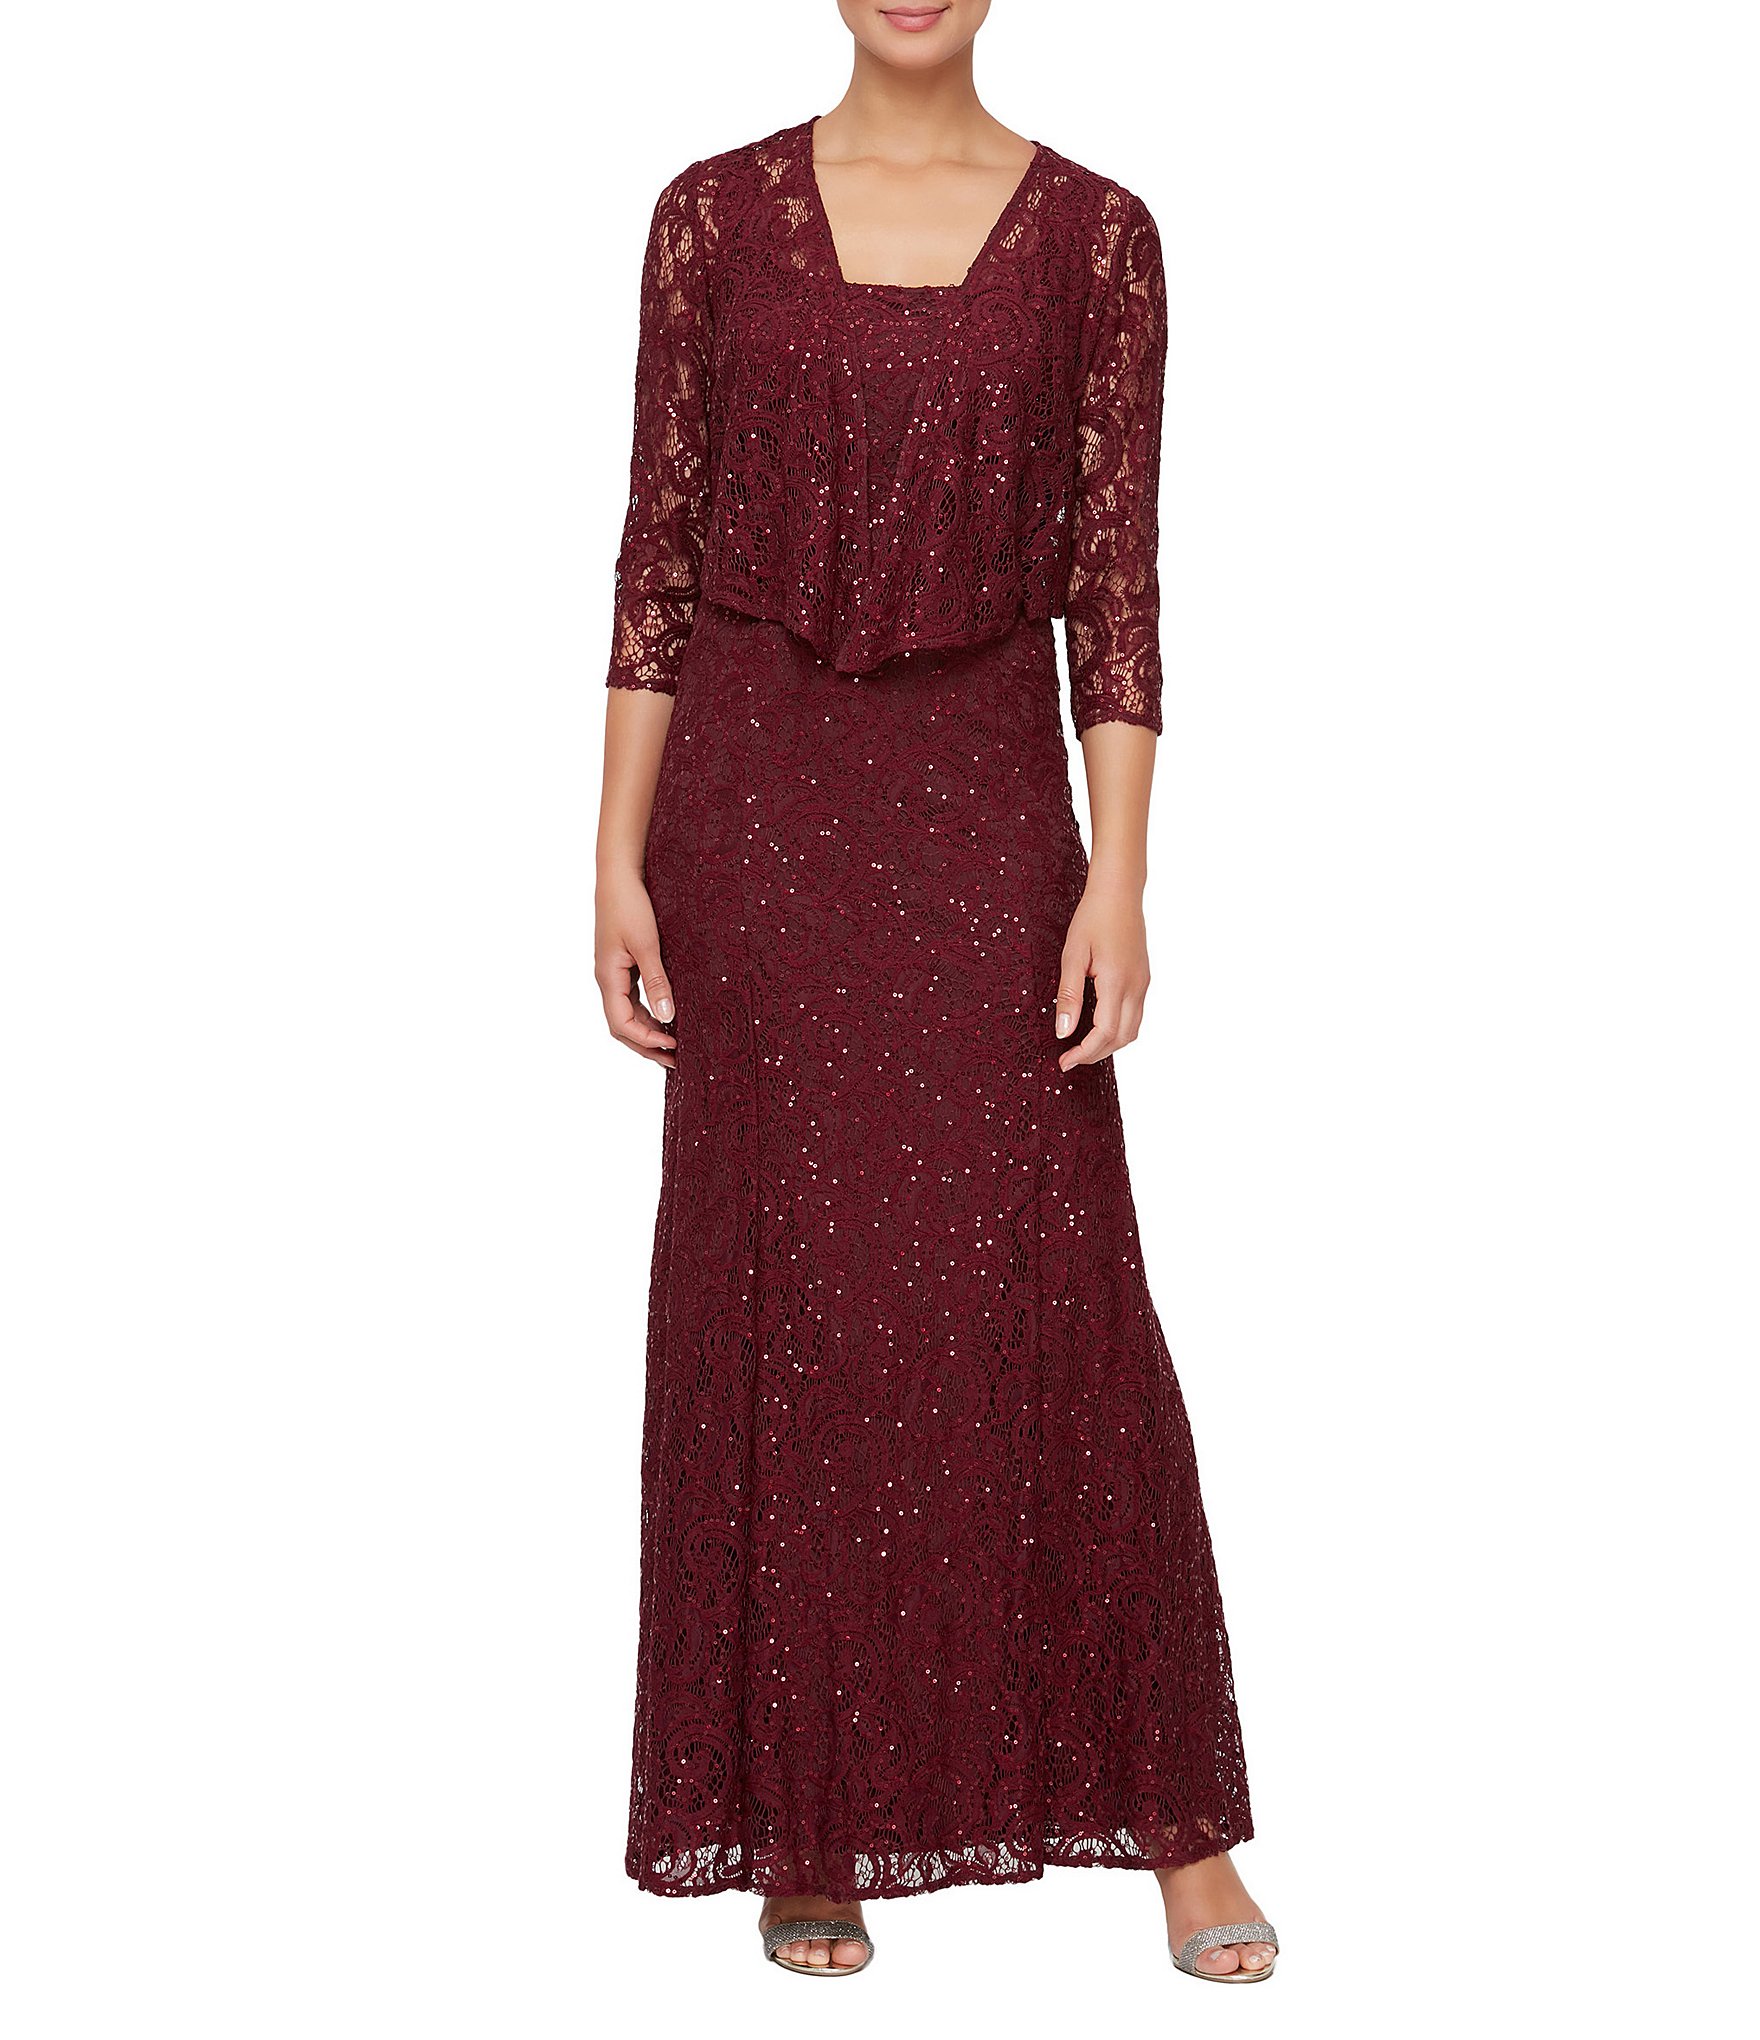 Sequin Lace Scoop Neck 3/4 Sleeve A-Line 2-Piece Jacket Gown